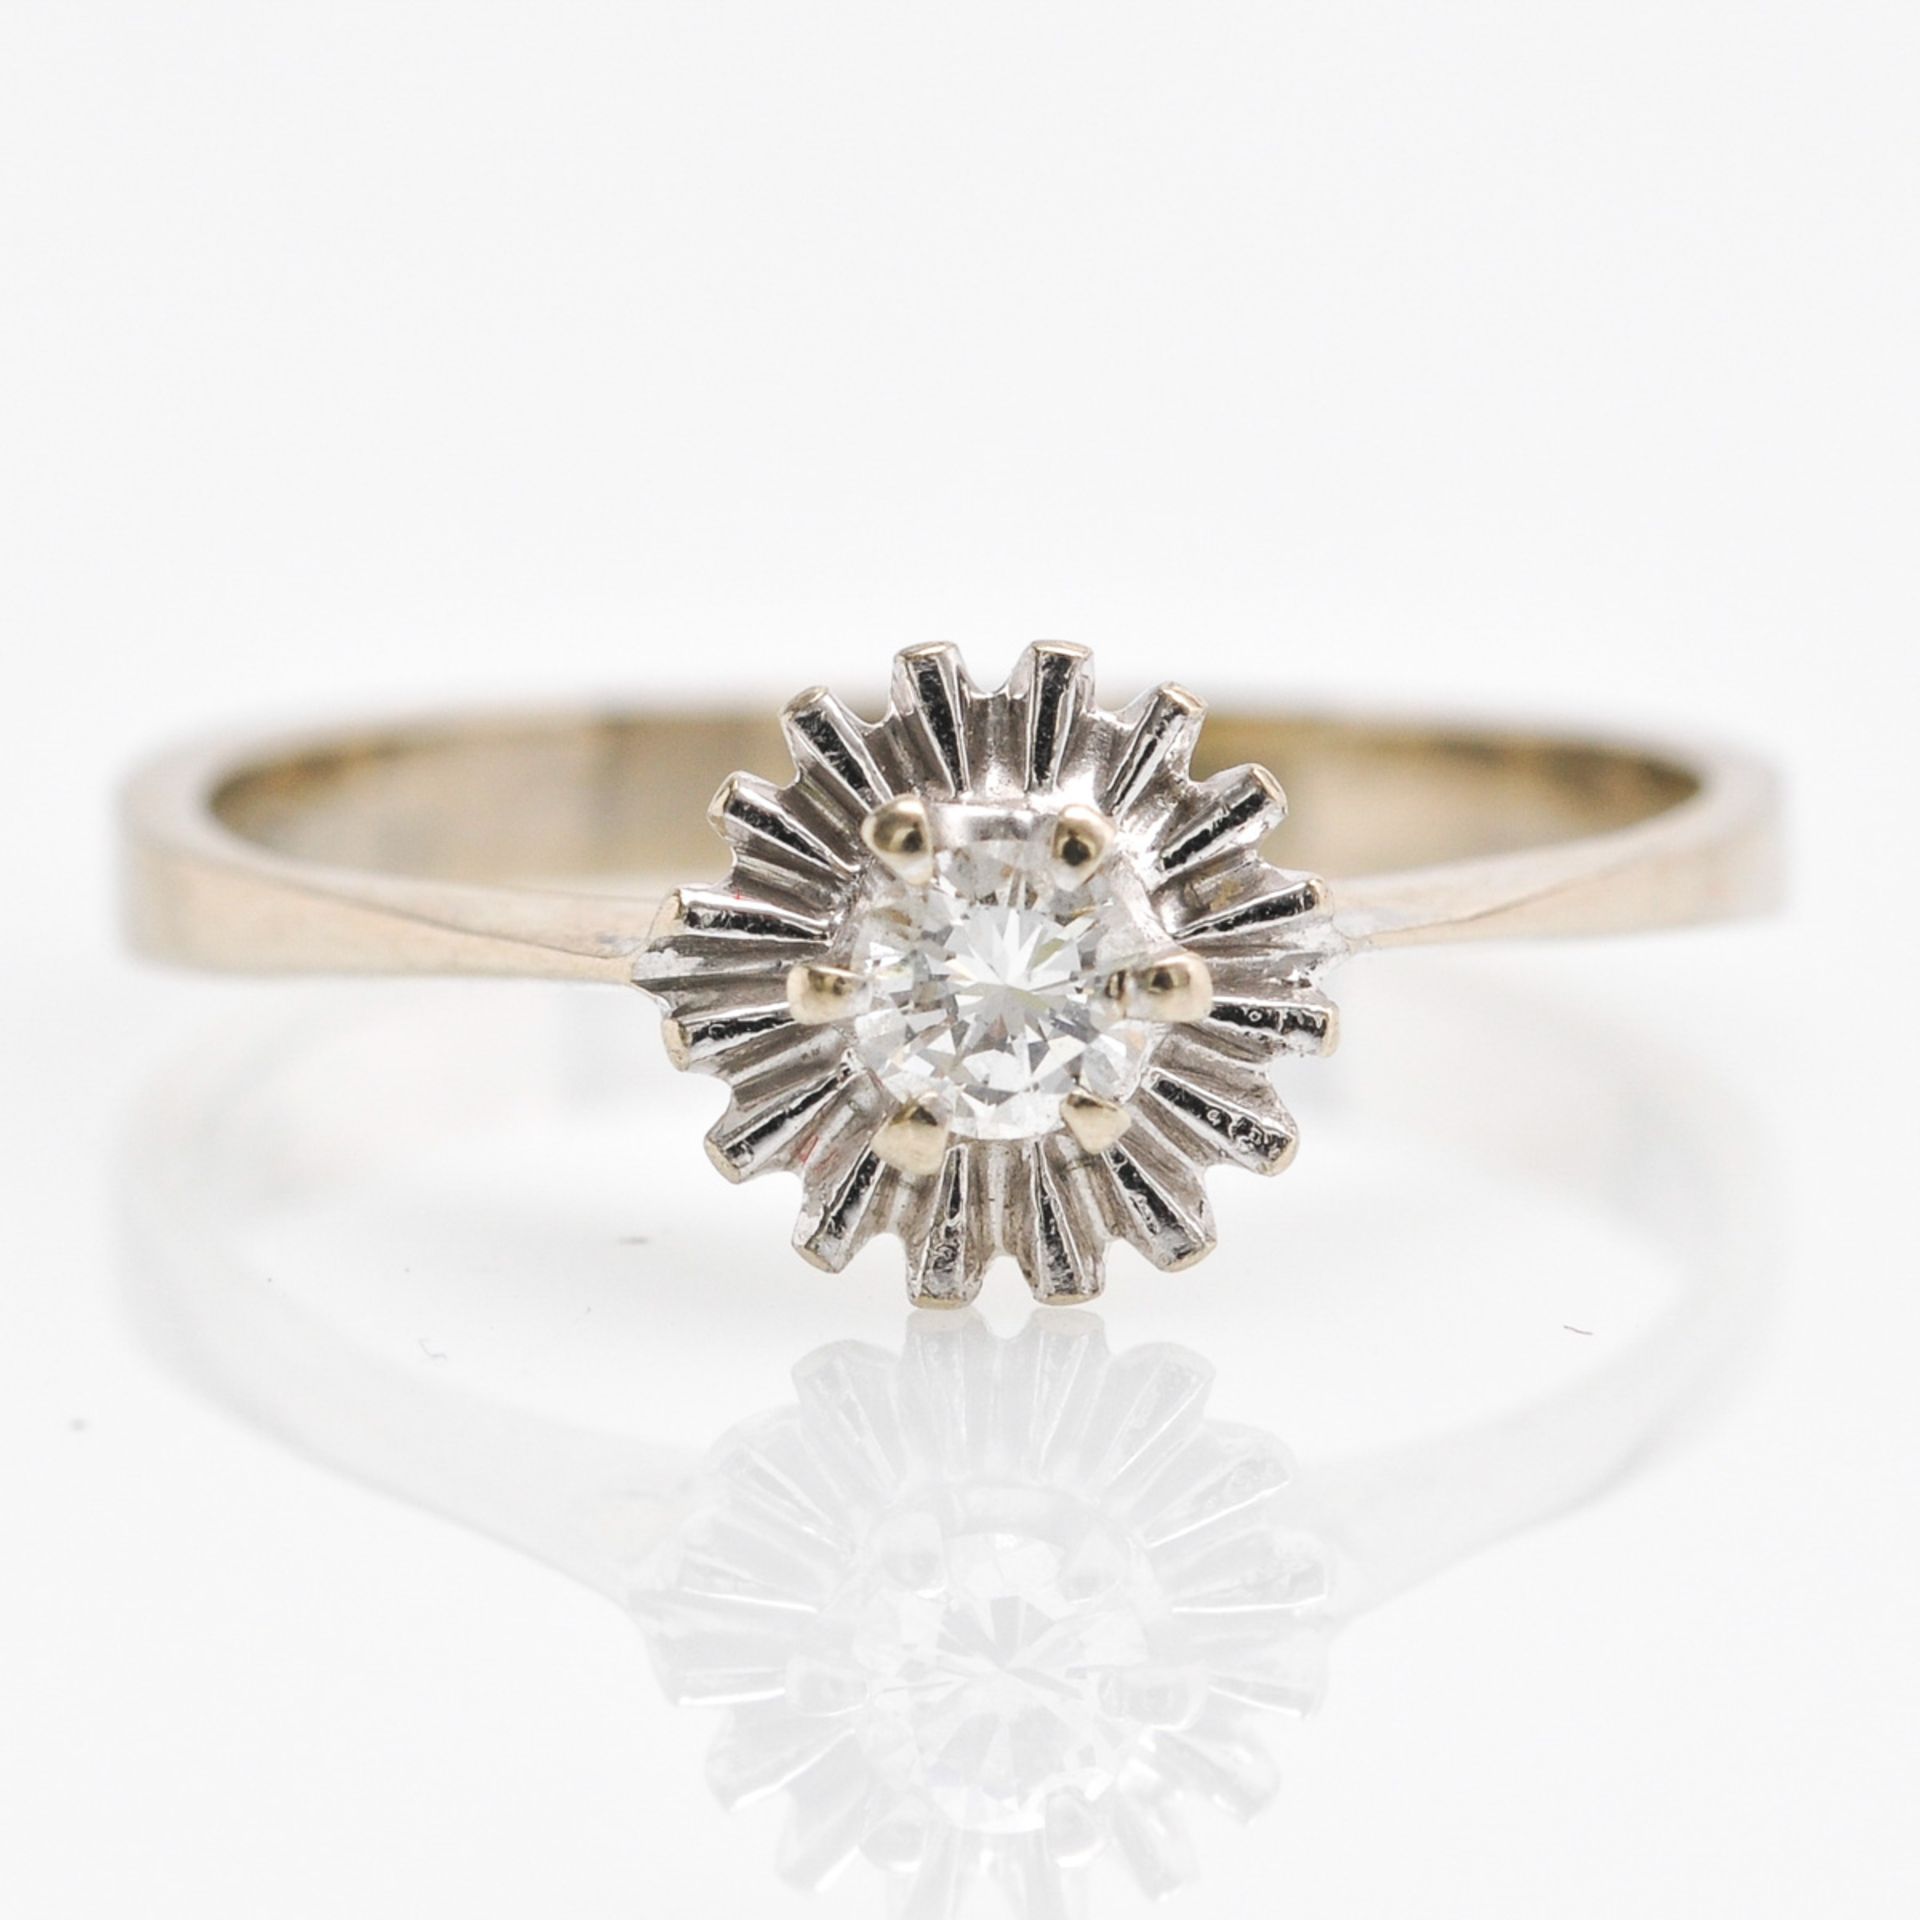 An 18KWG Ladies Solitaire Diamond Ring